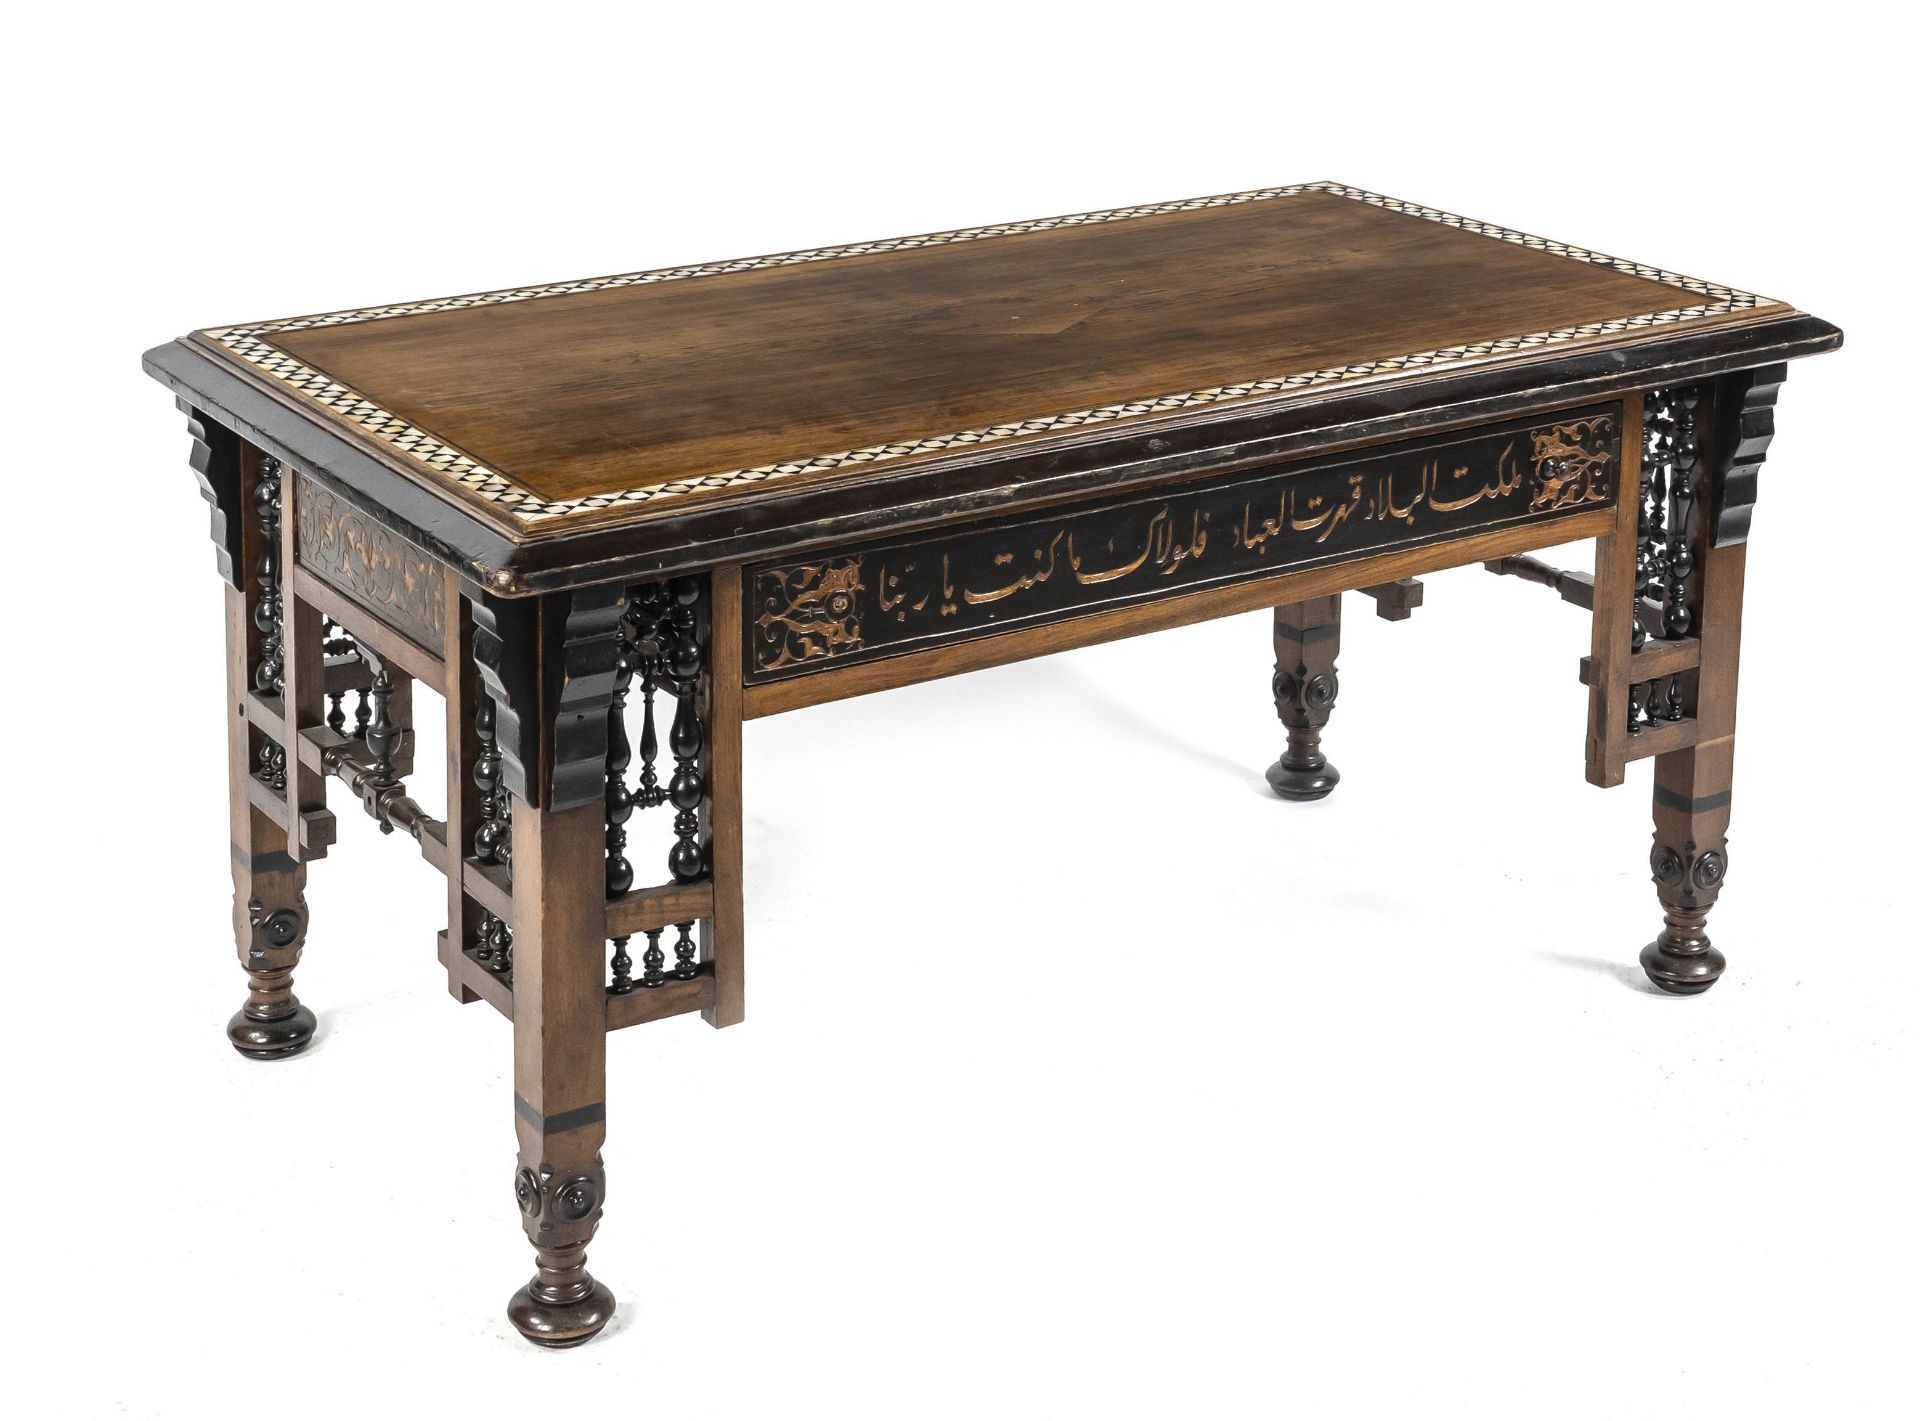 Oriental coffee table with mother-of-pearl inlays, circa 1900, walnut, partially ebonized,